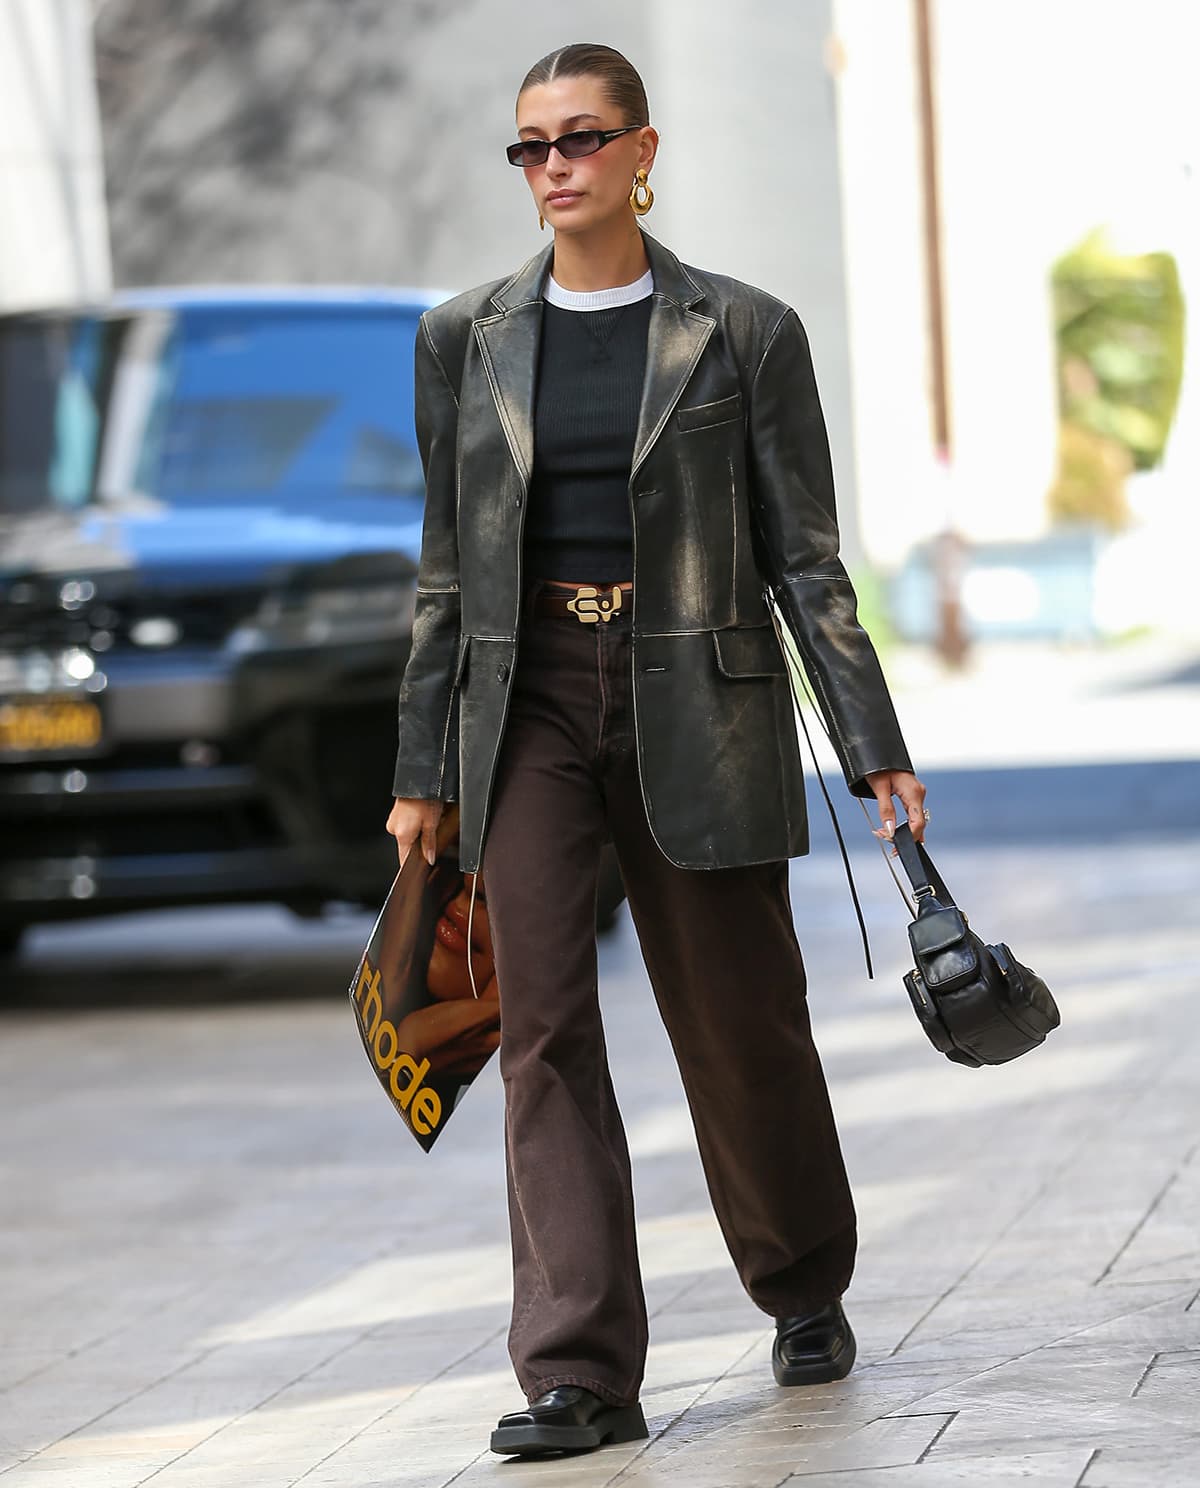 Hailey Bieber visits the Rhode Beauty office in Eytys leather blazer, brown jeans, and Marni loafers